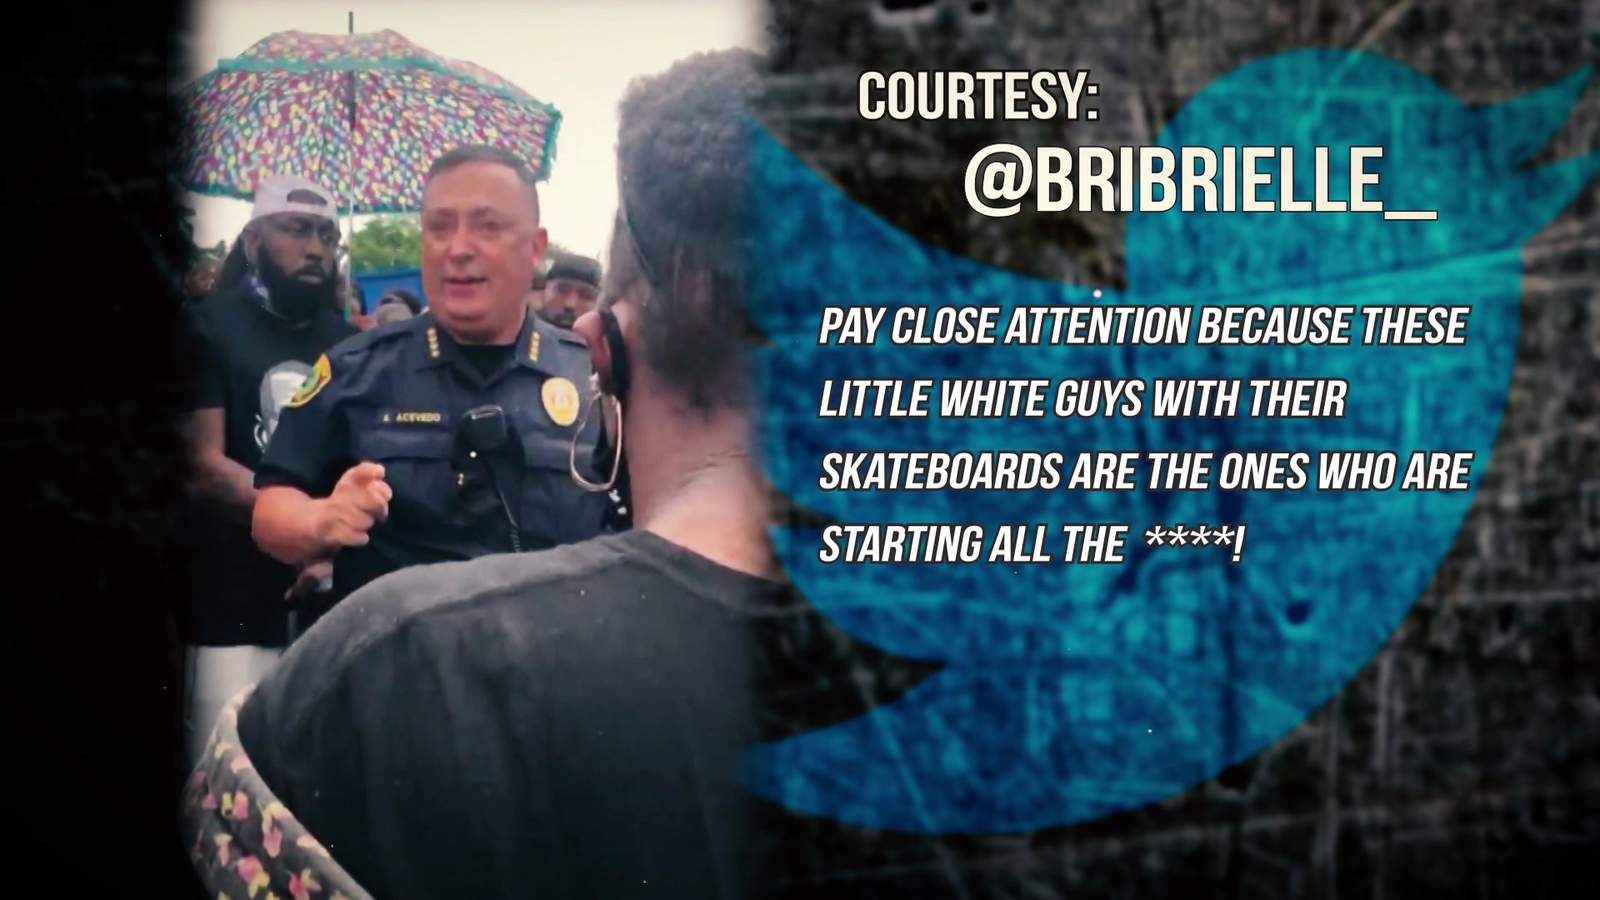 HPD Chief Art Acevedo’s statement on protest agitators doesn’t stand up to the KPRC 2 Trust Index